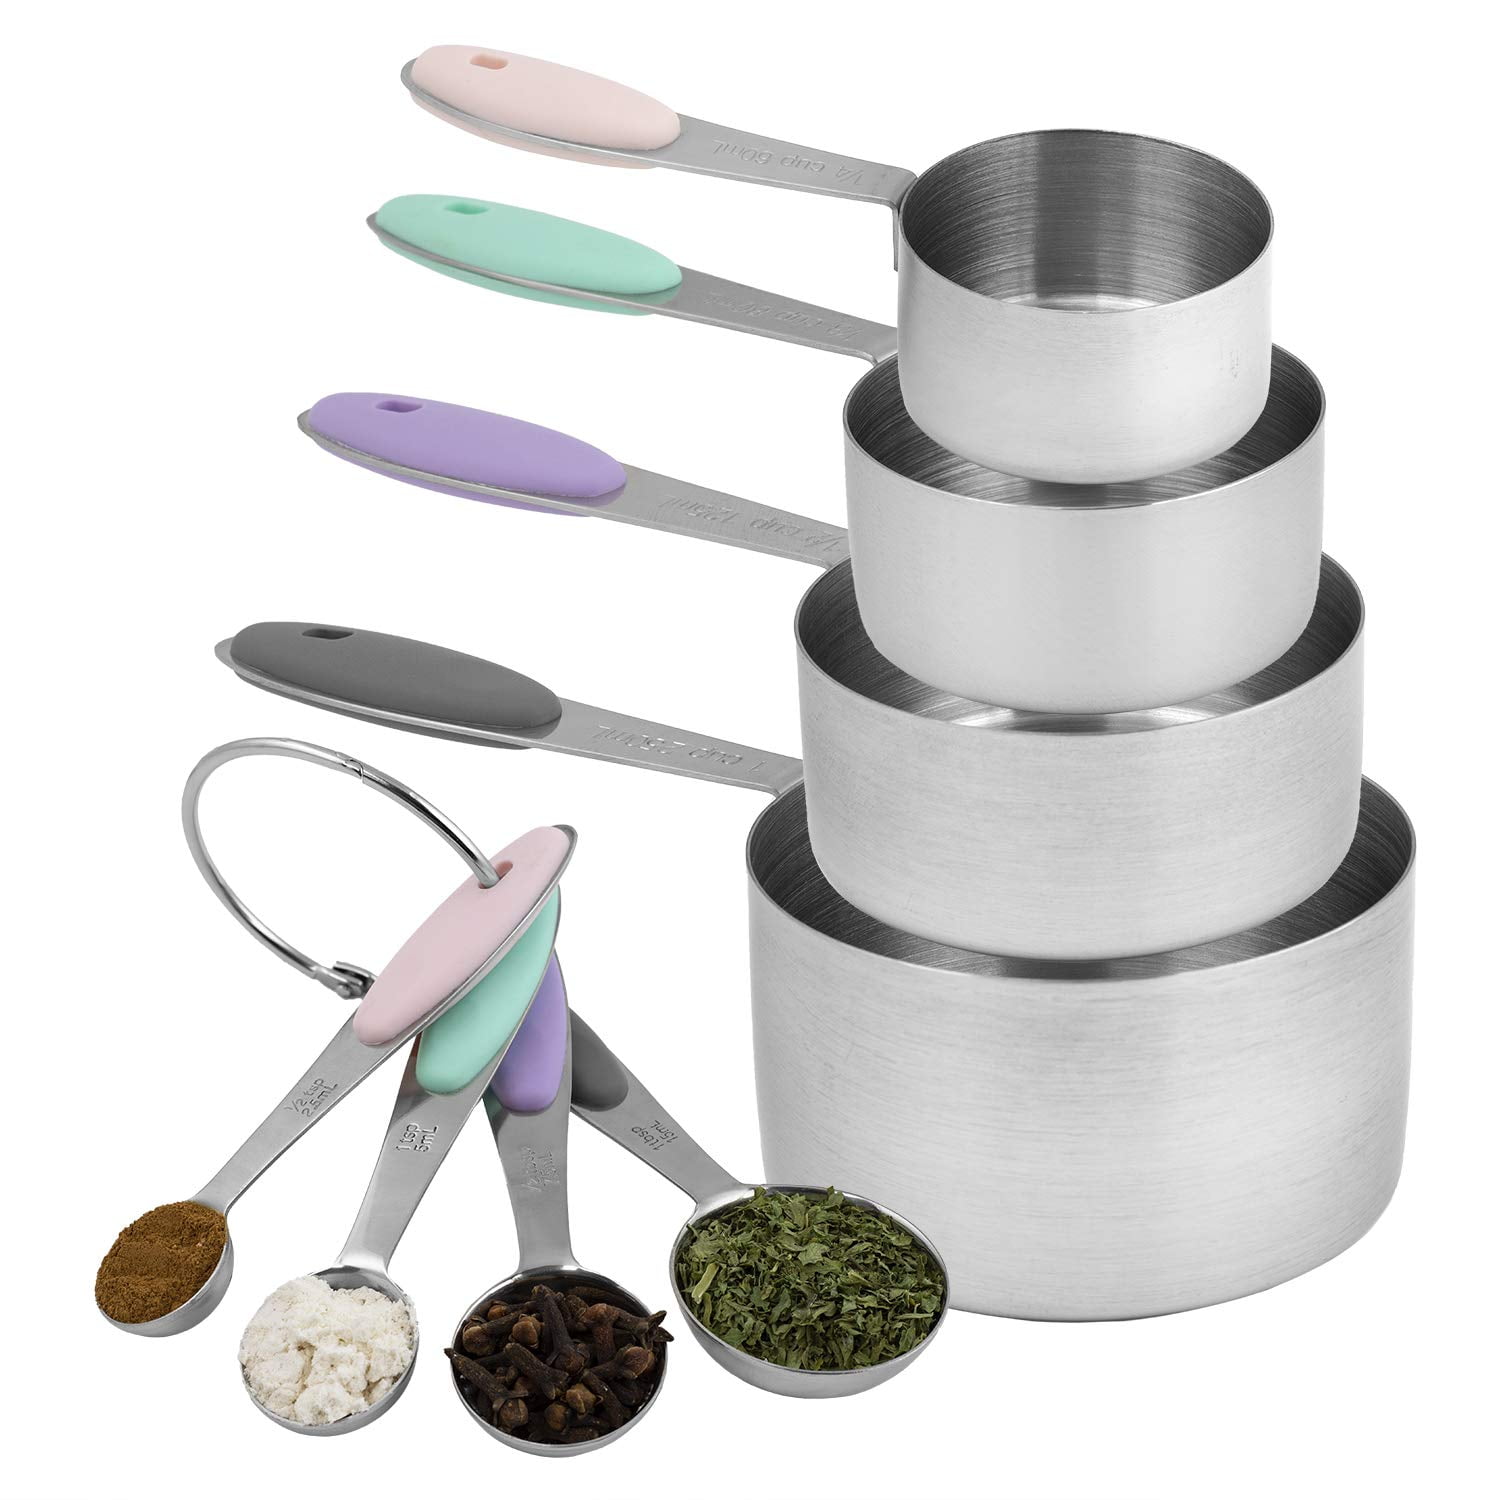 Measuring Cups And Spoons 8-piece Set Plastic Accurate Measuring Spoons  With Stainless Steel Handle Bpa Free And Dishwasher Safe - Measuring Spoons  - AliExpress